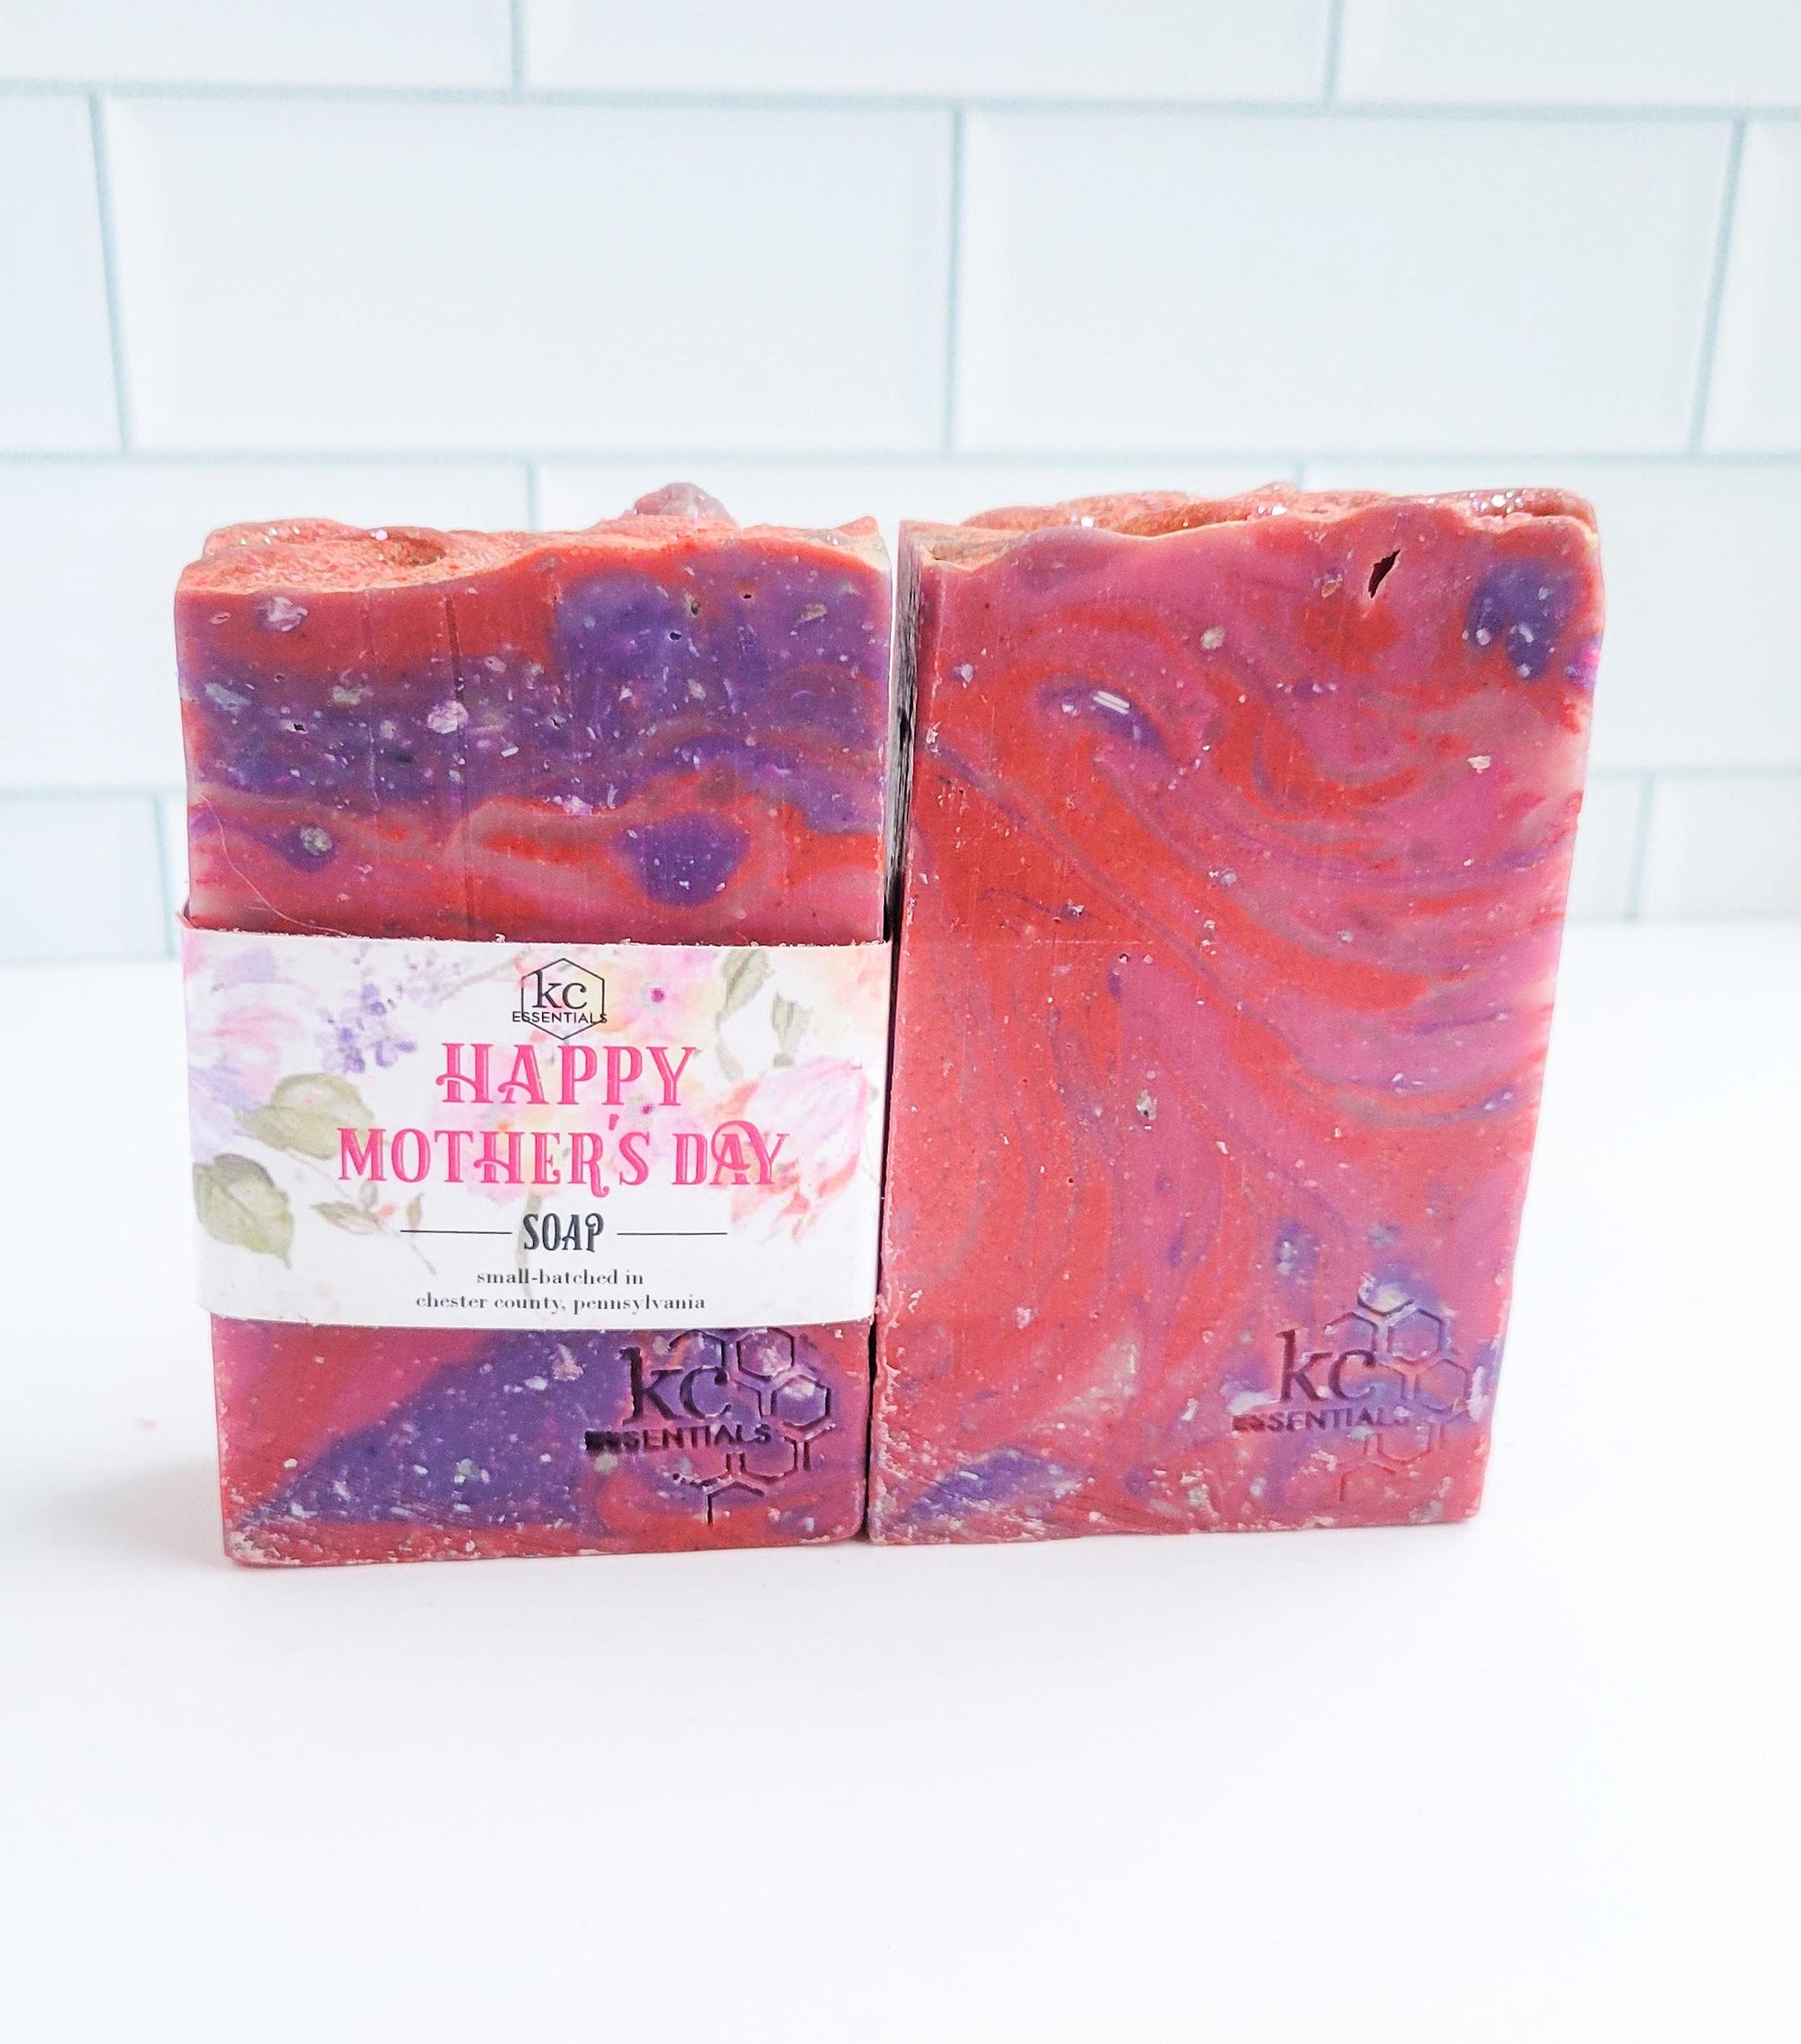 Oakmoss and Amber scented, this bar soap is made with natural and other ingredients, including coconut oil avocado oil, grapeseed oil shea butter and olive oil.